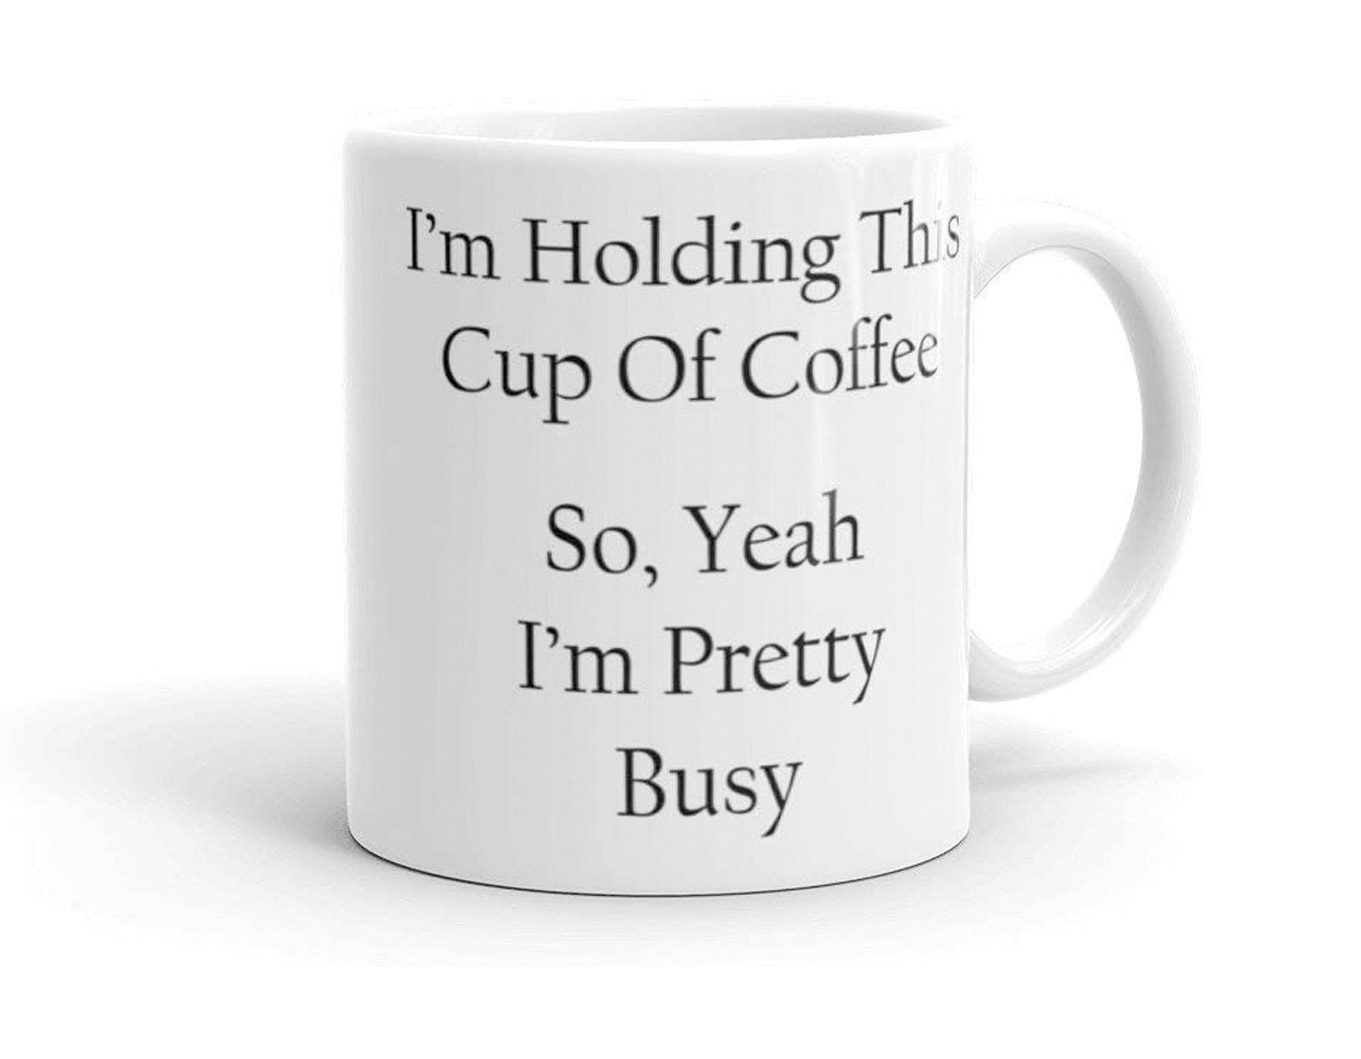 Im Holding A Cup Of Coffee So Yeah IM Pretty Busy - Funny Coffee mugIm Holding A Cup Of Coffee So Yeah IM Pretty Busy - Funny Coffee mug